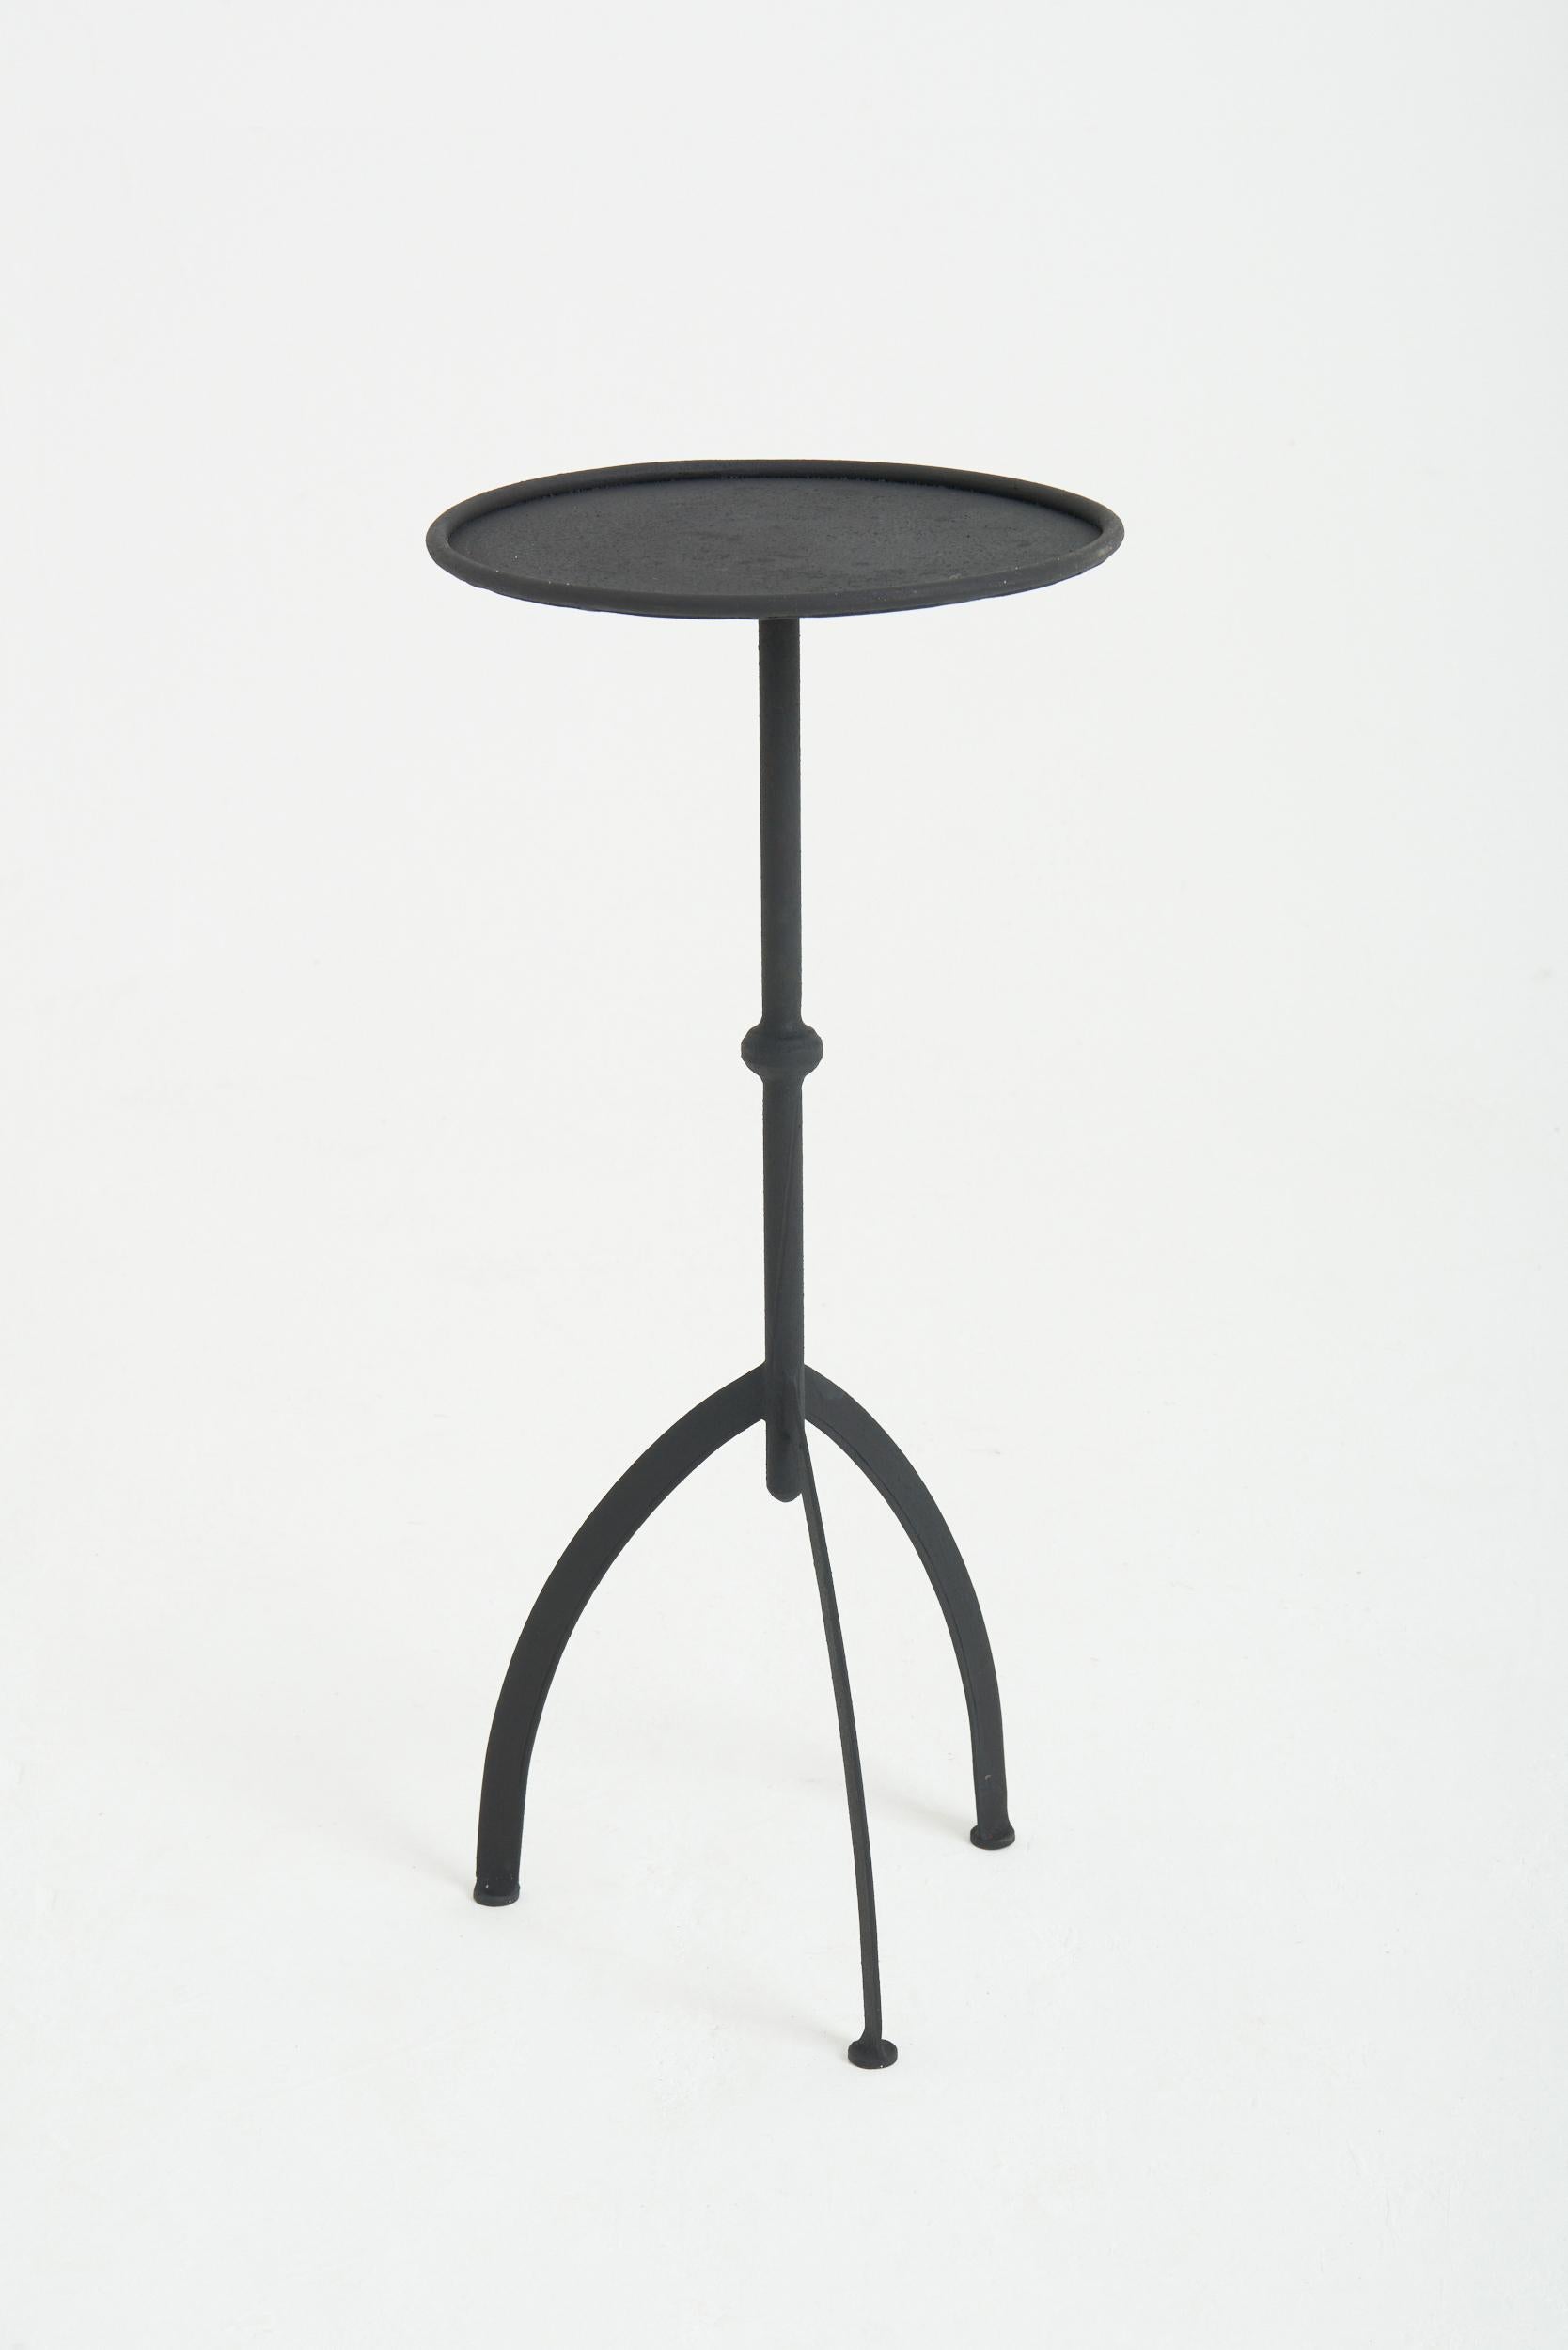 A black patinated wrought iron martini table
Spain, contemporary
60.5 cm high by 27 cm diameter